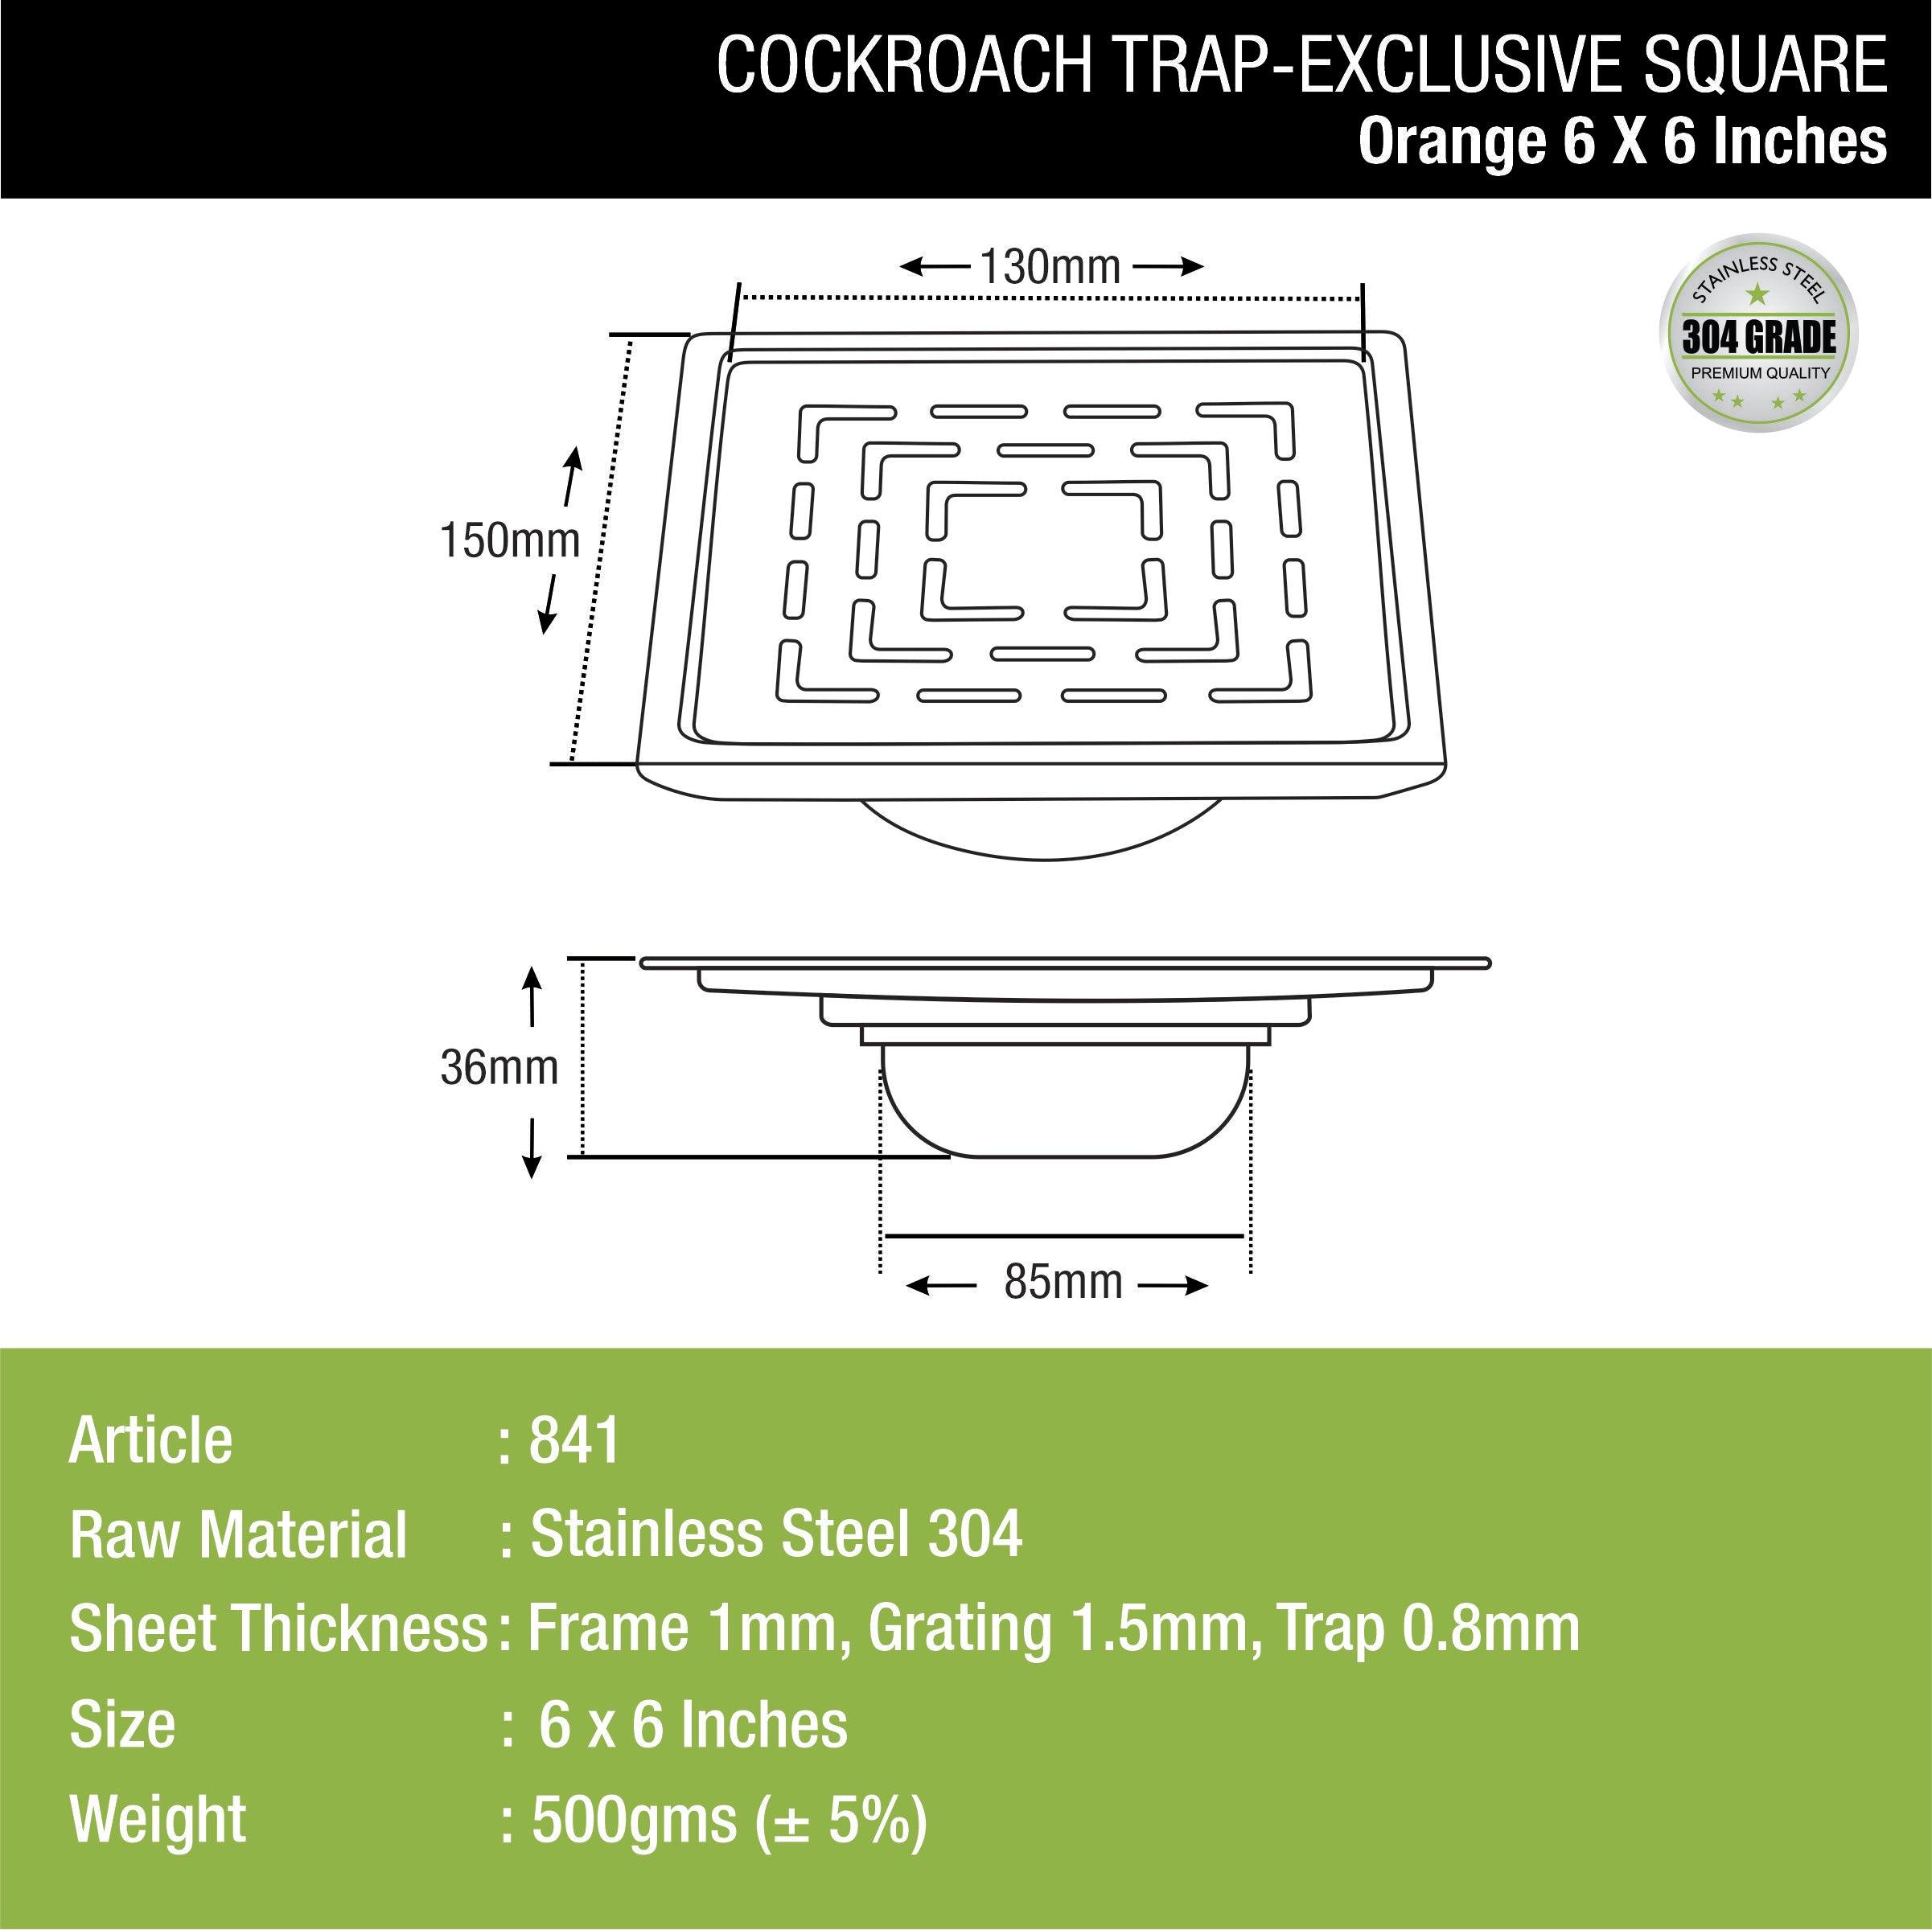 Orange Exclusive Square Floor Drain (6 x 6 Inches) with Cockroach Trap dimensions and sizes